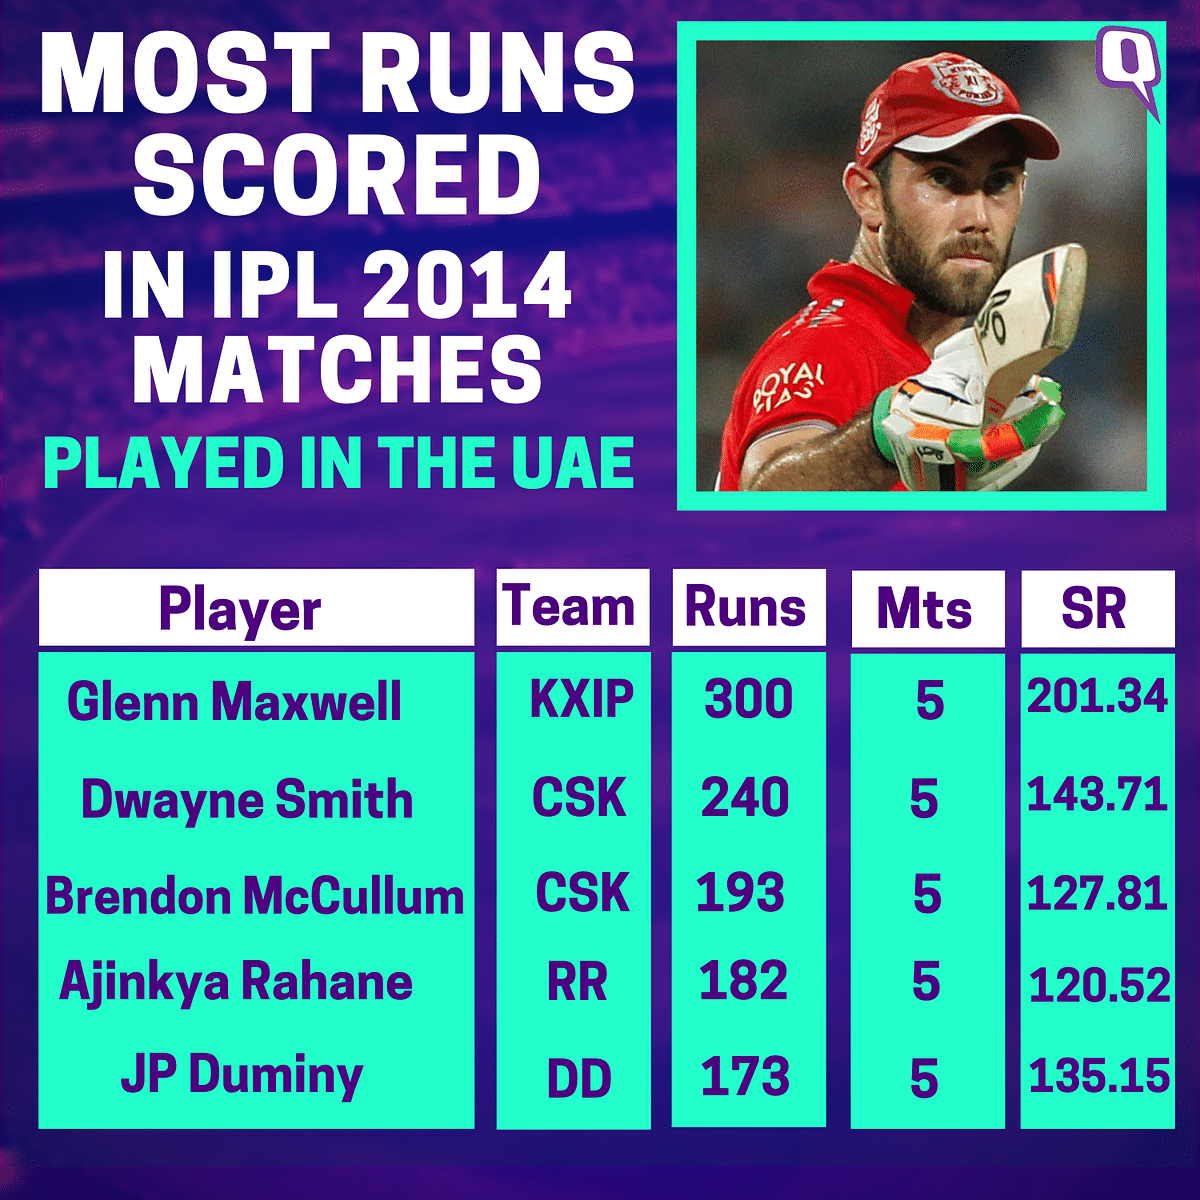 Who were the top performers when the IPL was last played in the UAE?